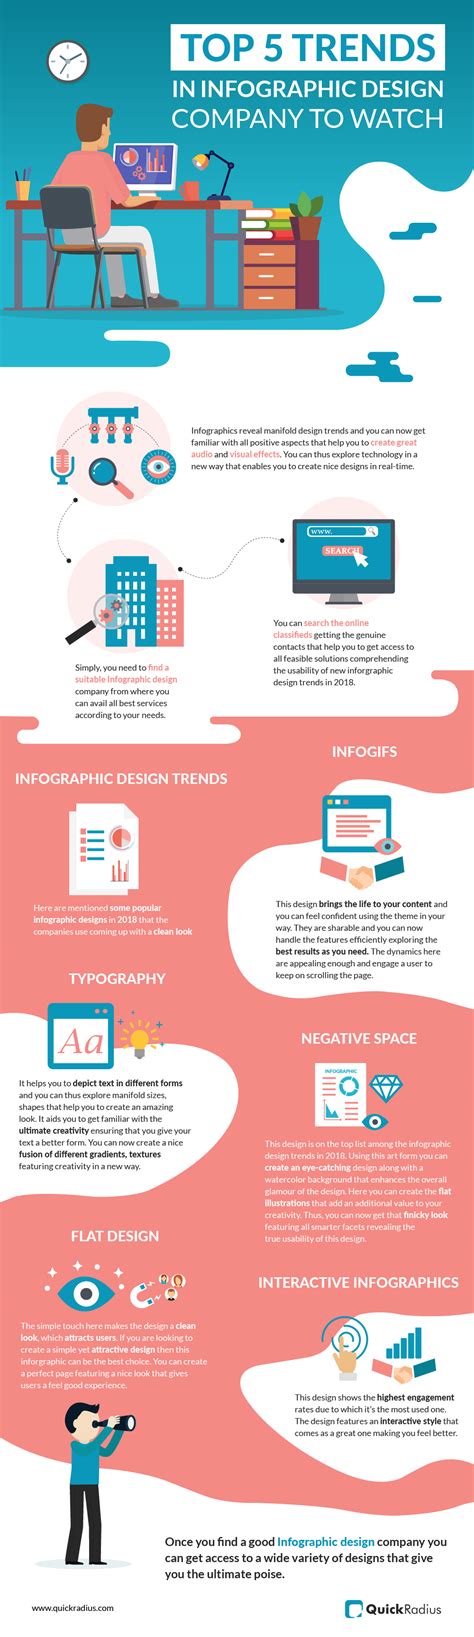 Top 5 Trends In Infographic Design Company To Watch. - Creative Infographic Design Company ...